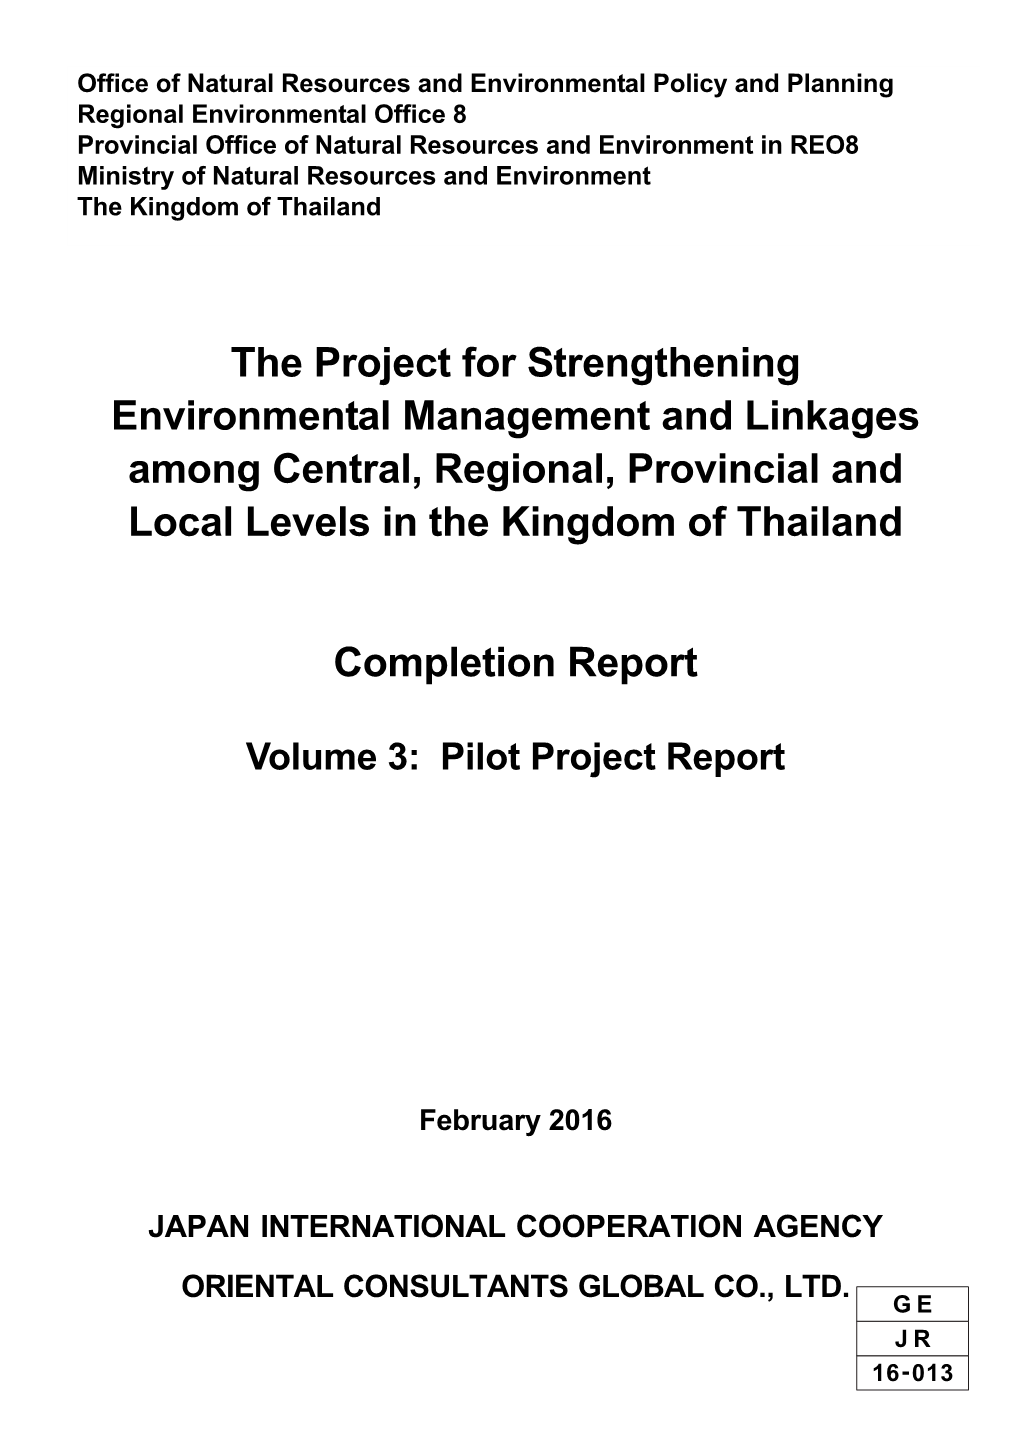 The Project for Strengthening Environmental Management and Linkages Among Central, Regional, Provincial and Local Levels in the Kingdom of Thailand